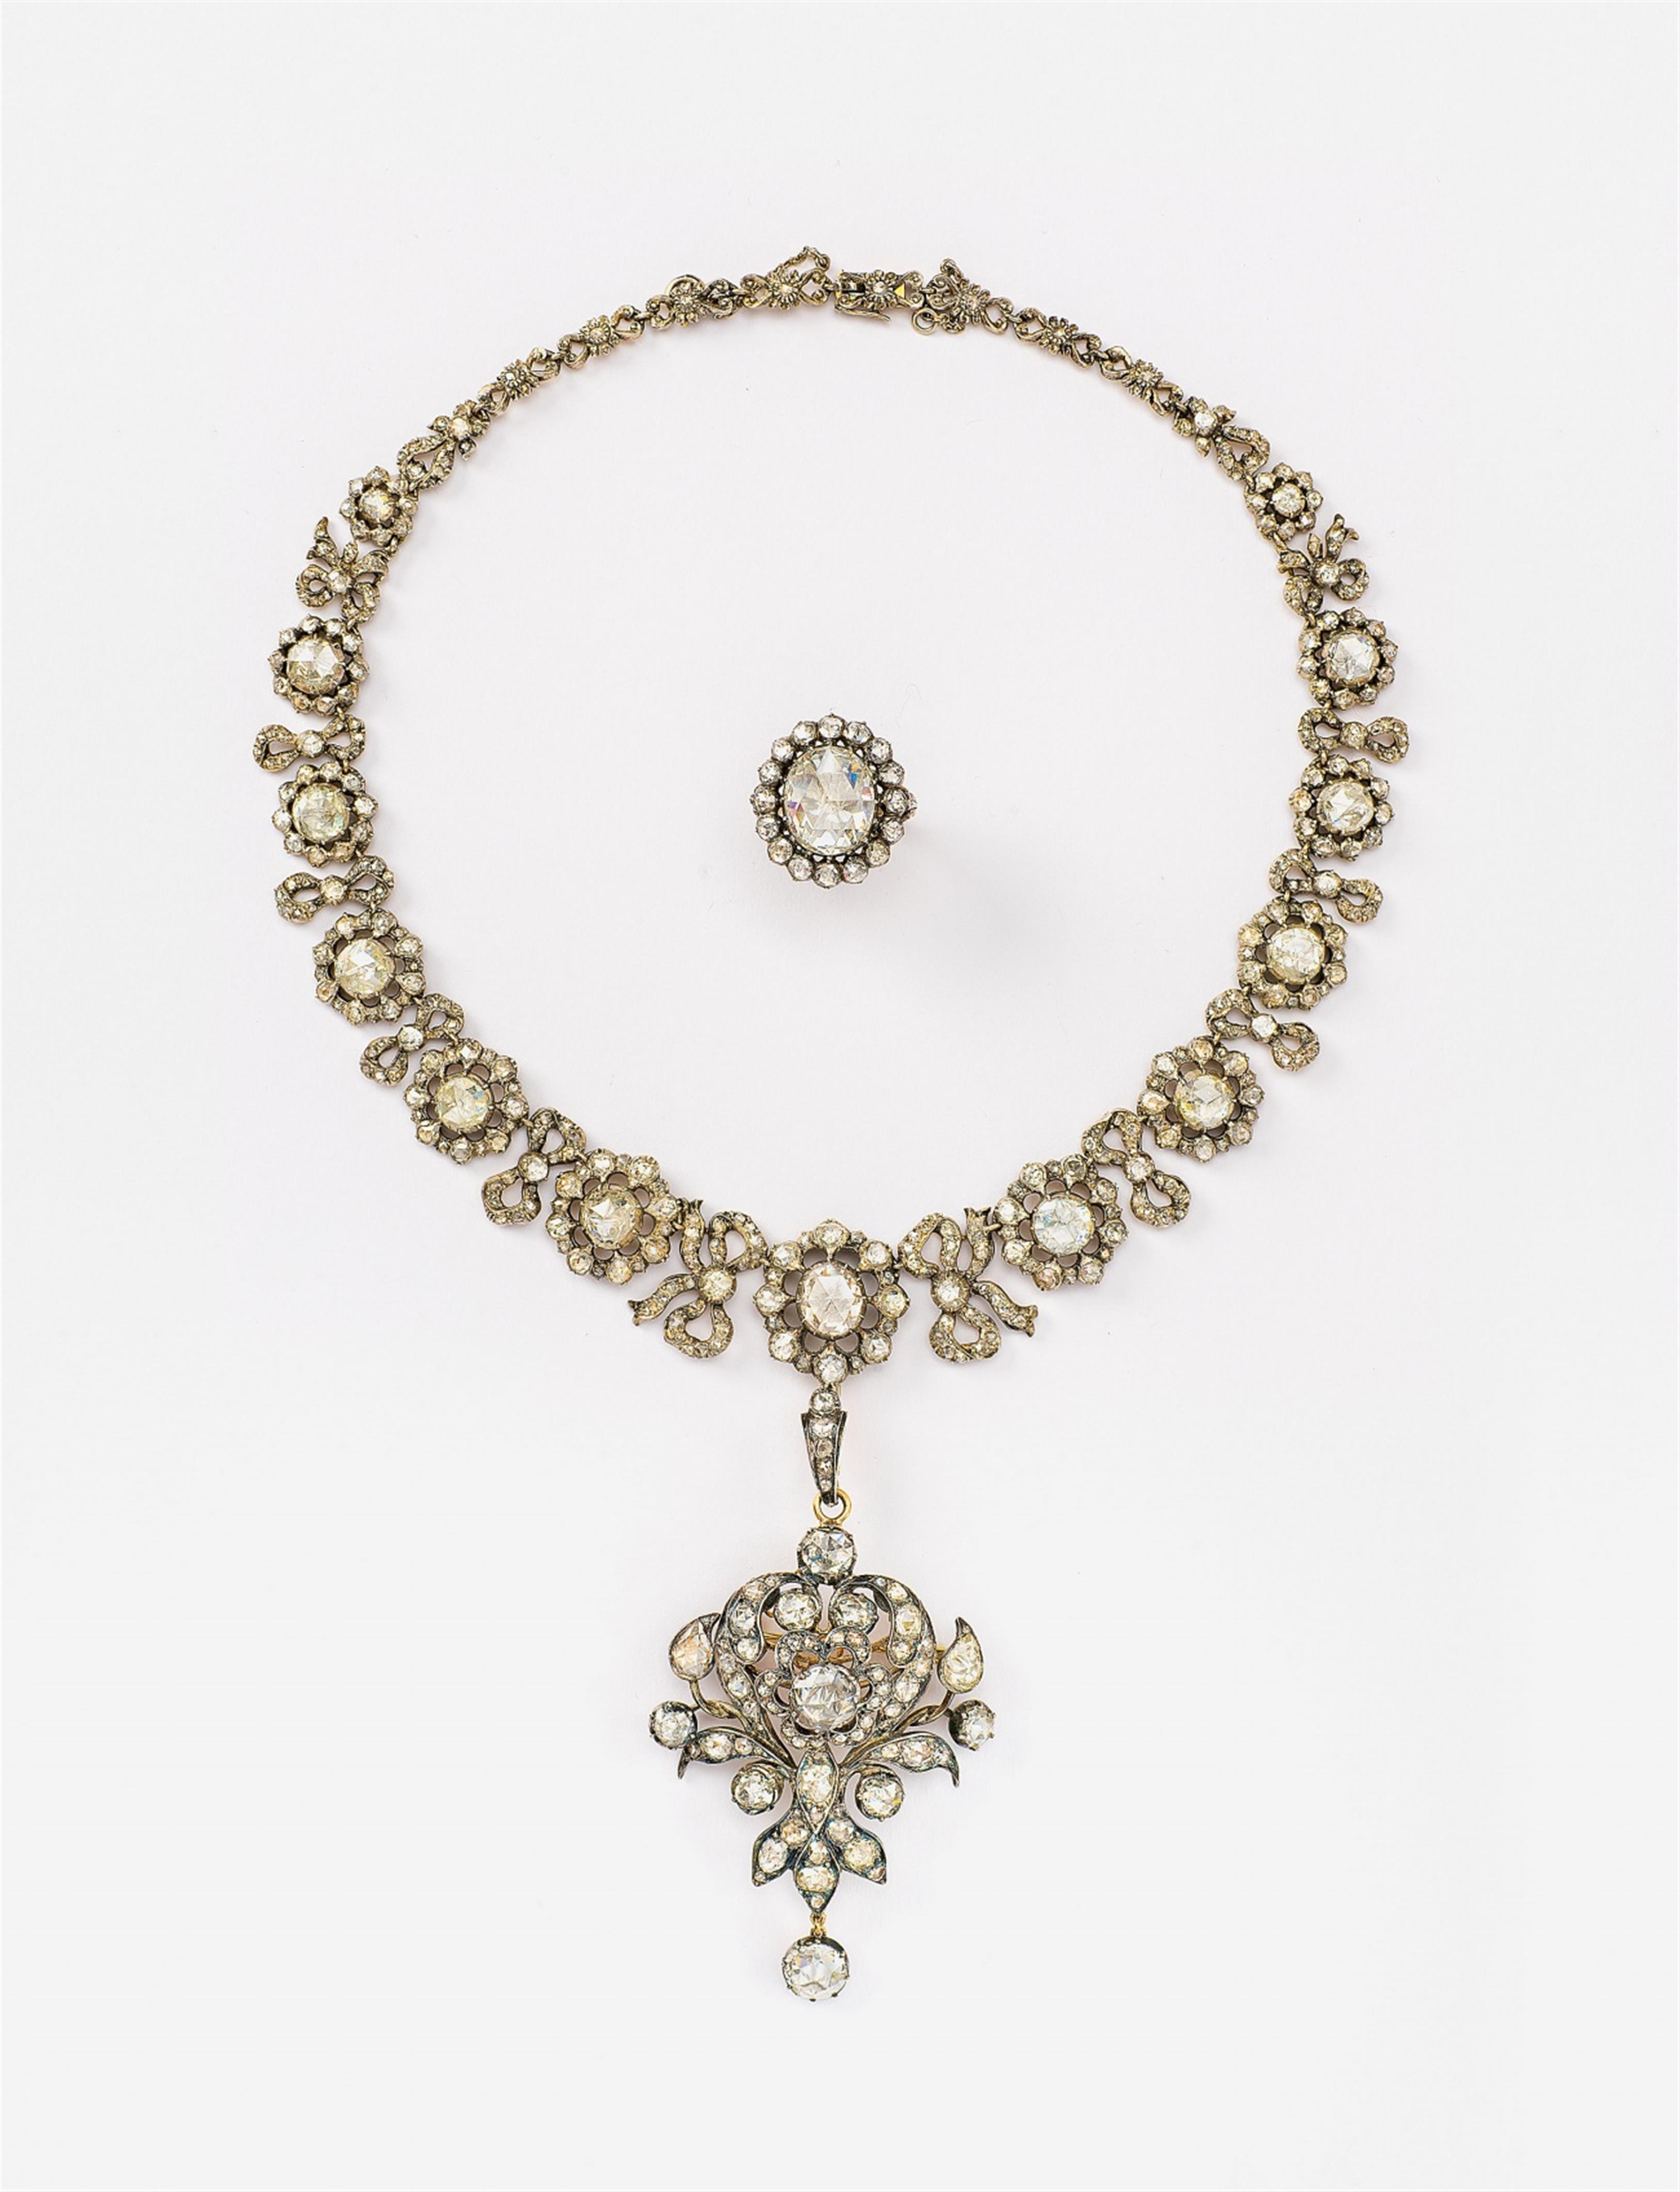 A diamond necklace and pendant - image-2